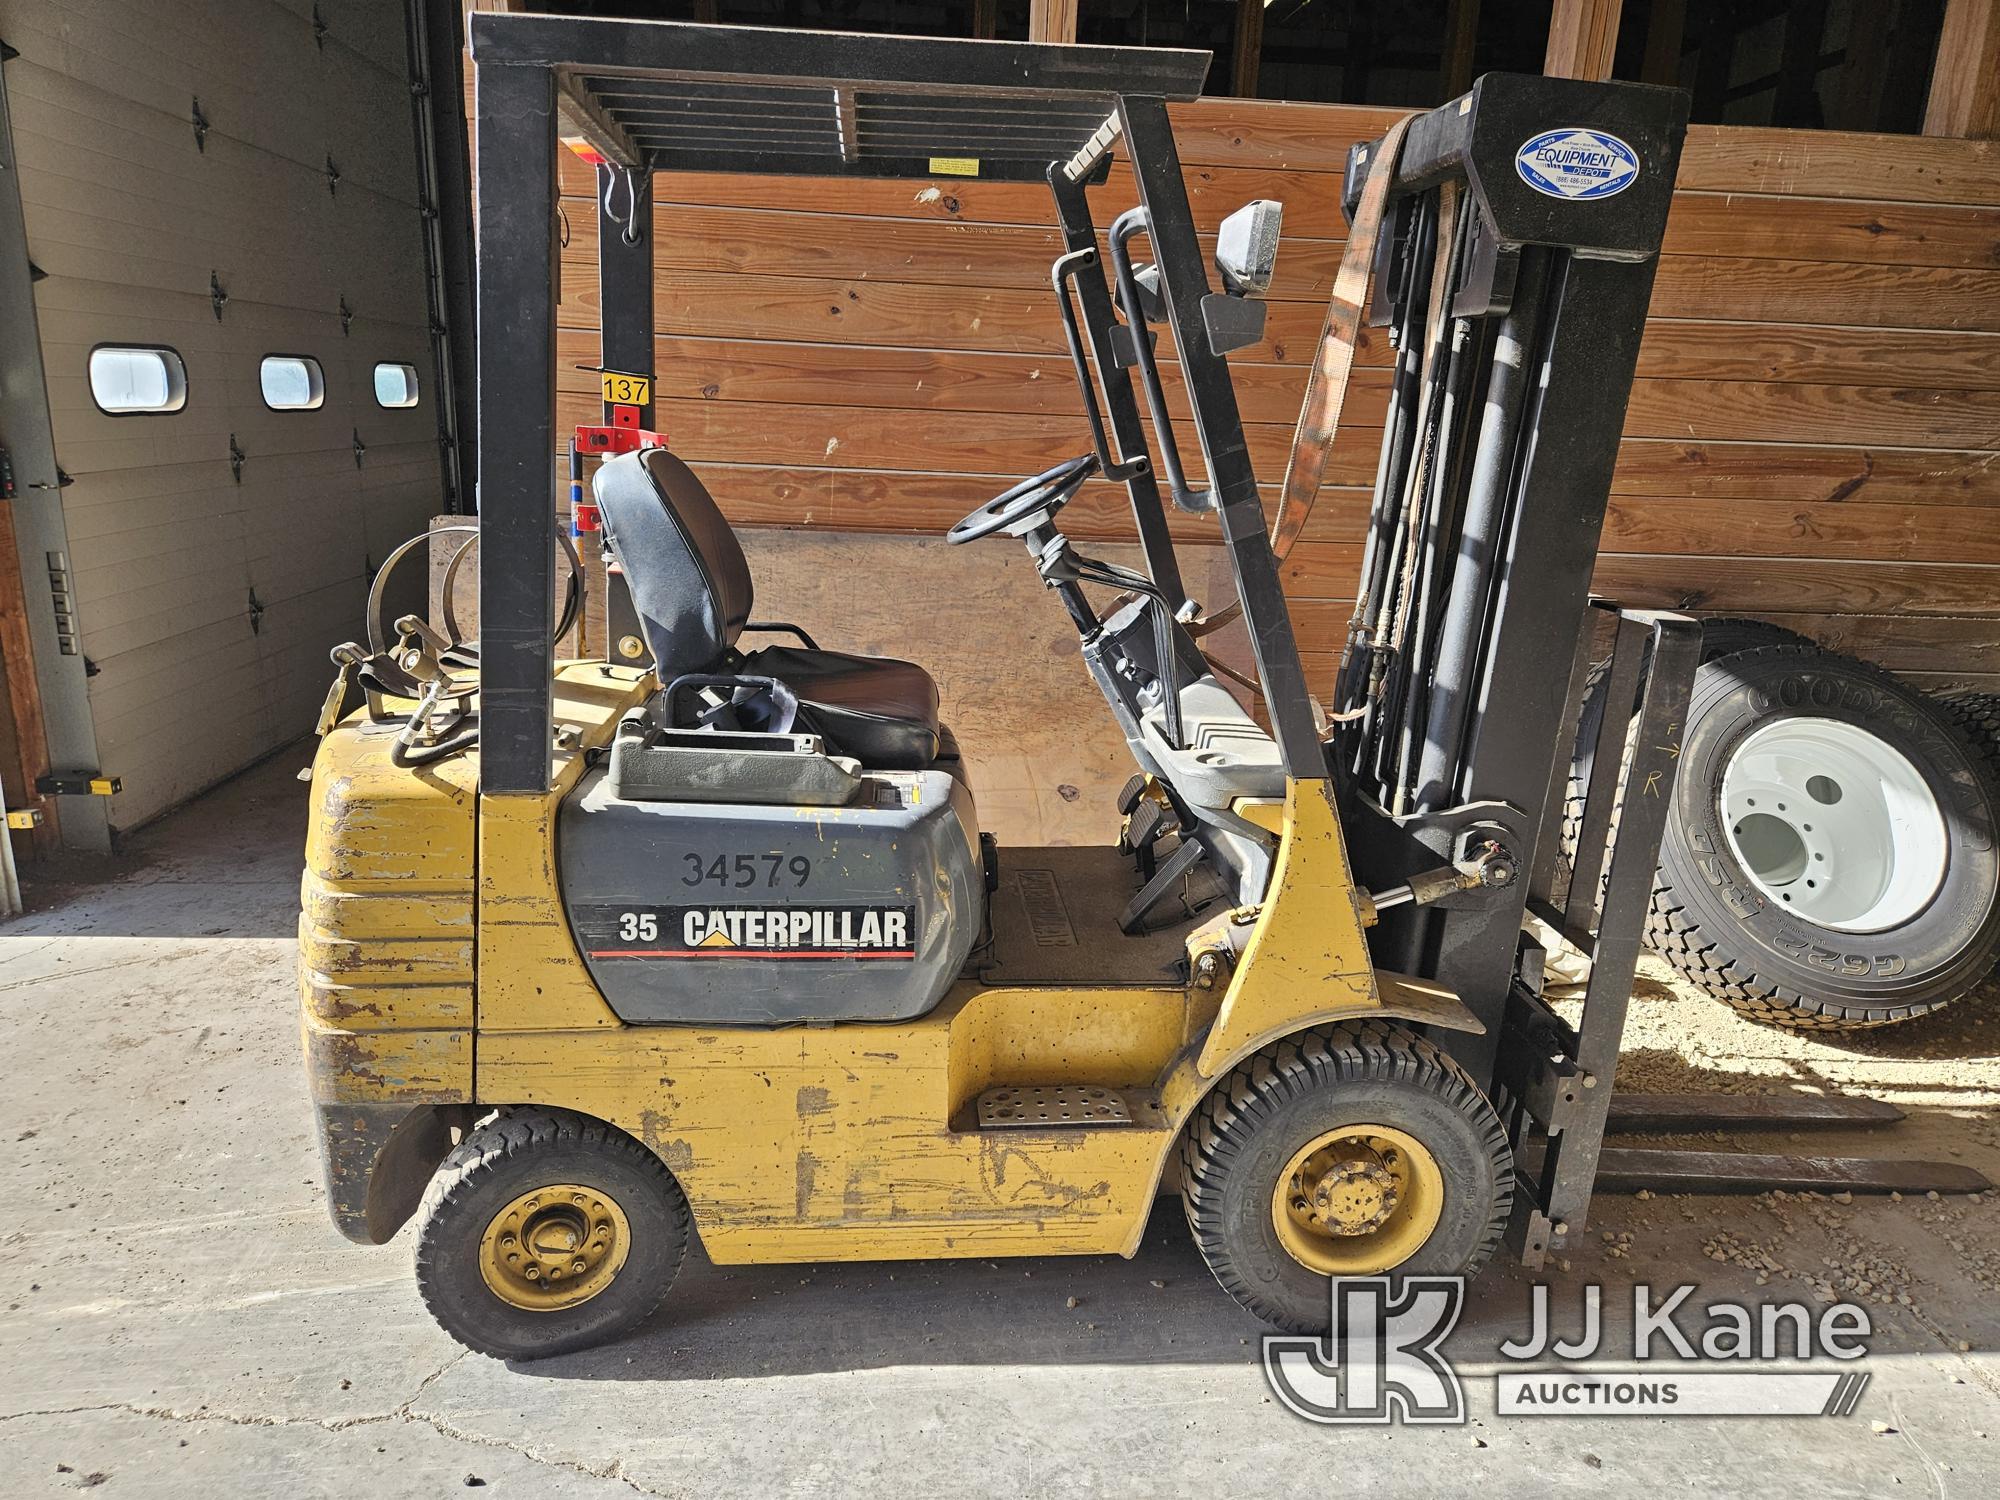 (Portage, WI) 1994 Caterpillar GP18 Pneumatic Tired Forklift Seller States: Not Running, Condition U